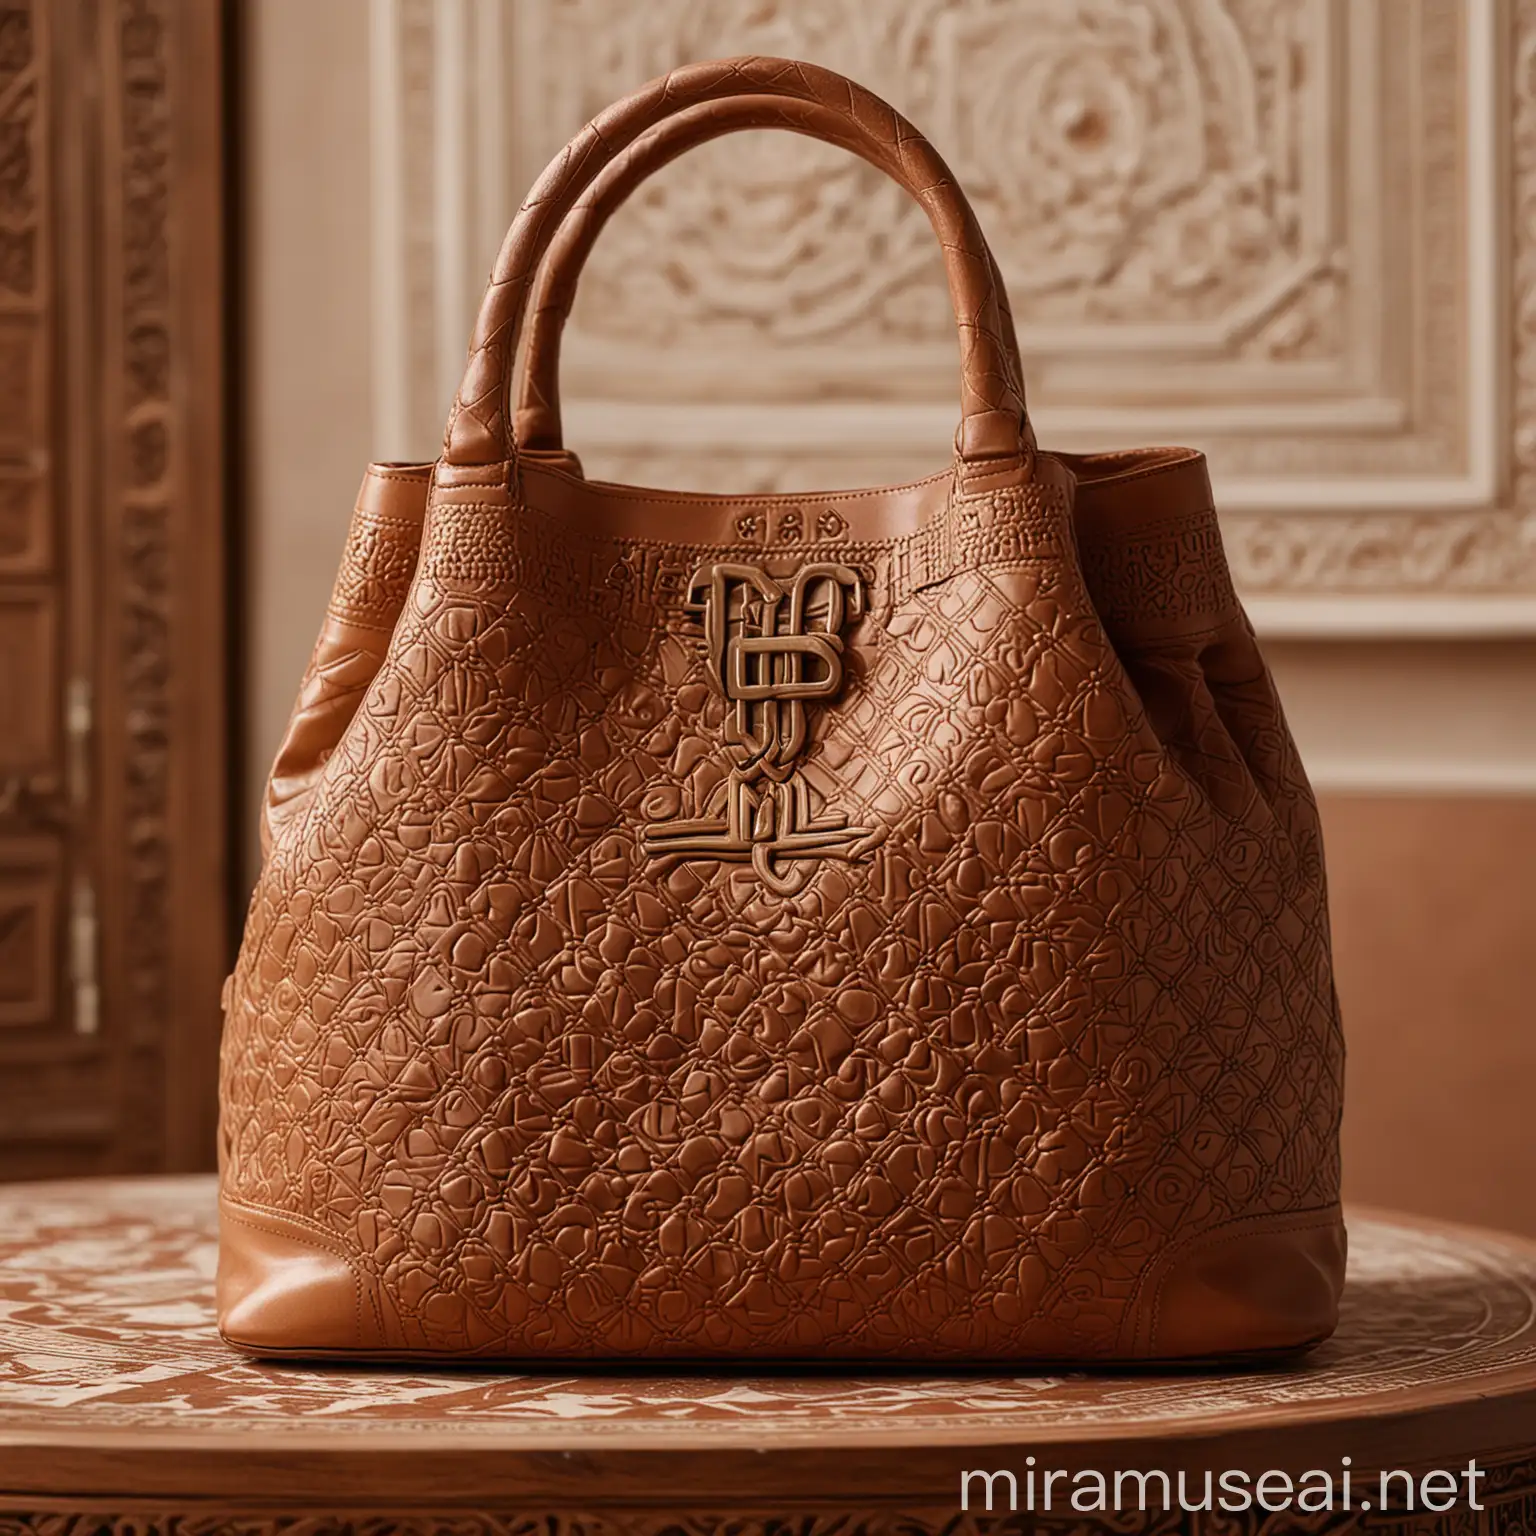 Chic Chanel Leather Sac with Geometric Embossing on MoorishInspired Table